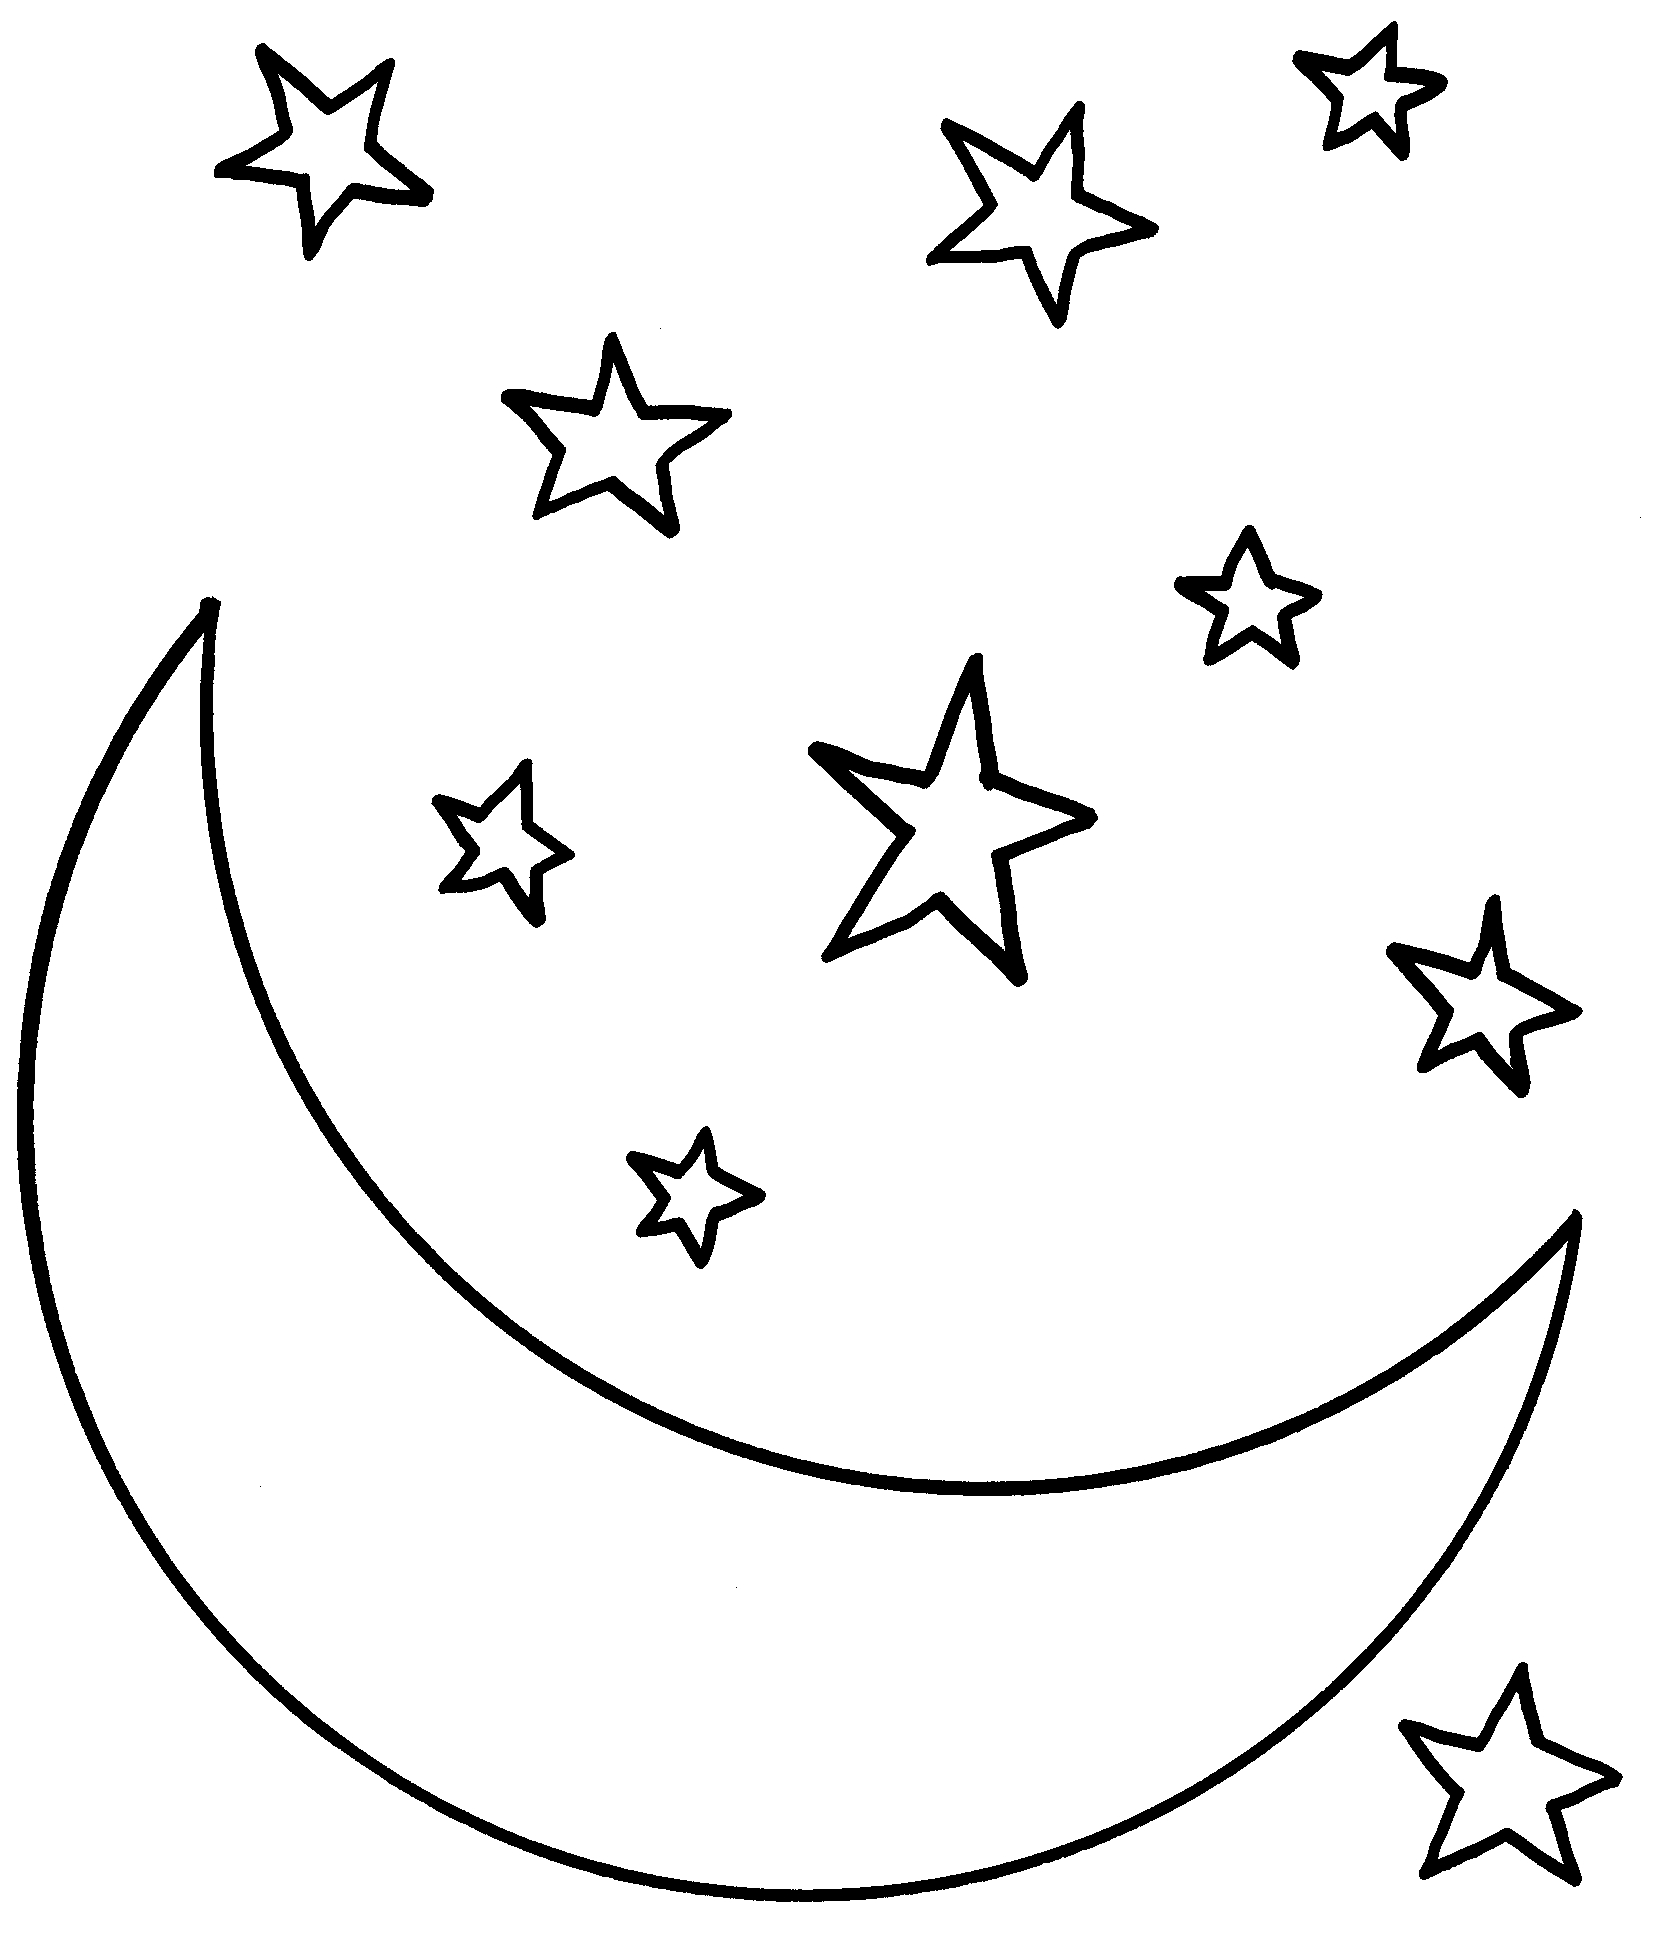 star coloring pages with crescent moon Coloring4free